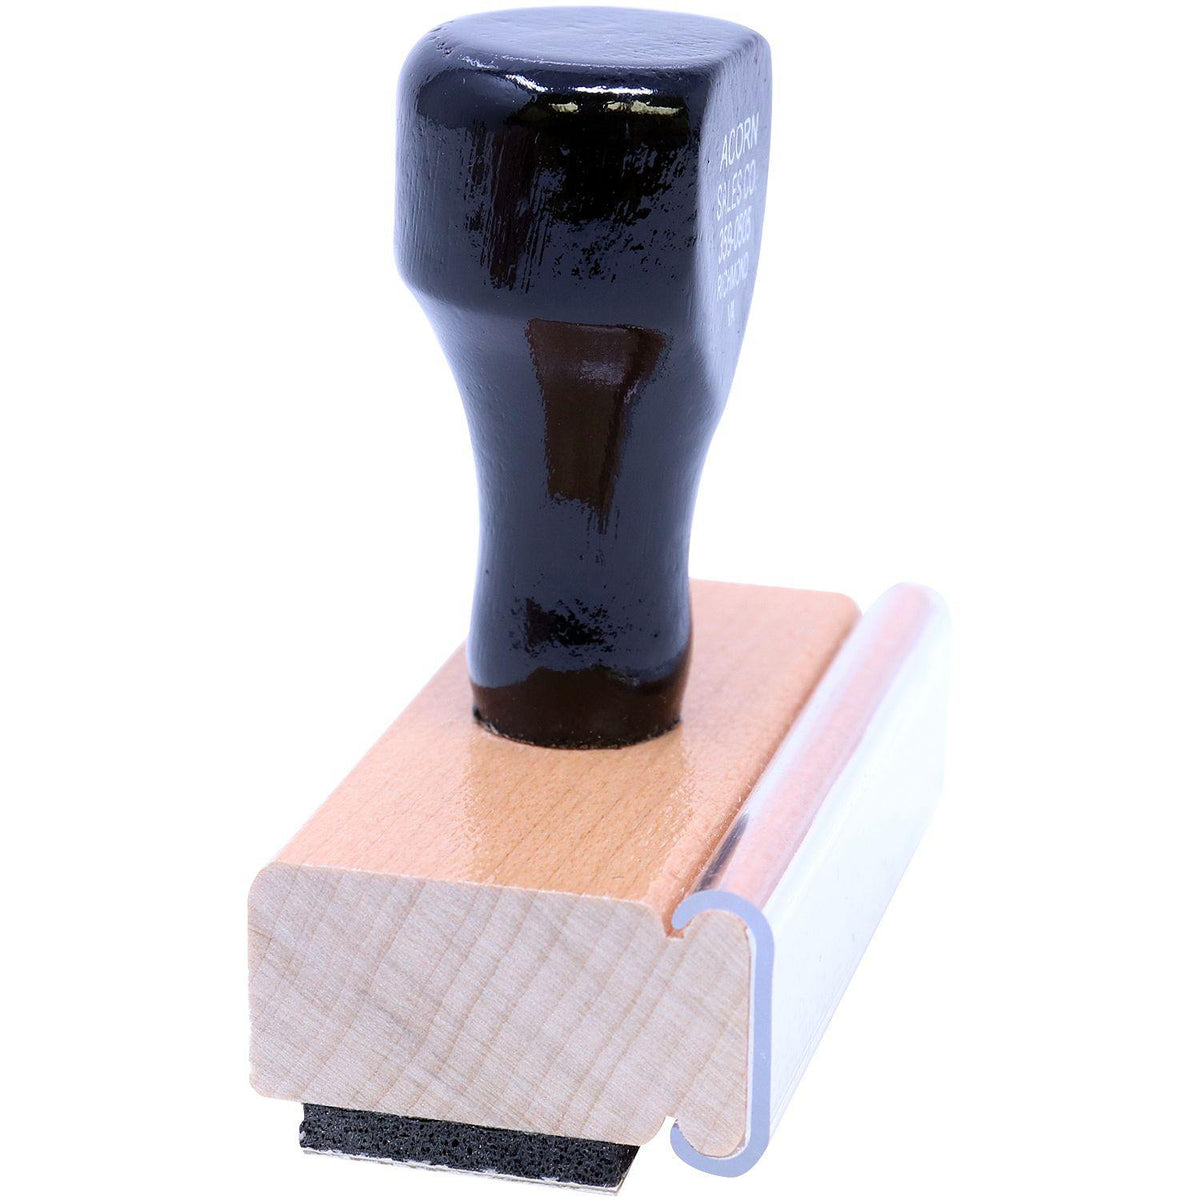 Side View of States Exhibit Legal Rubber Stamp at an Angle